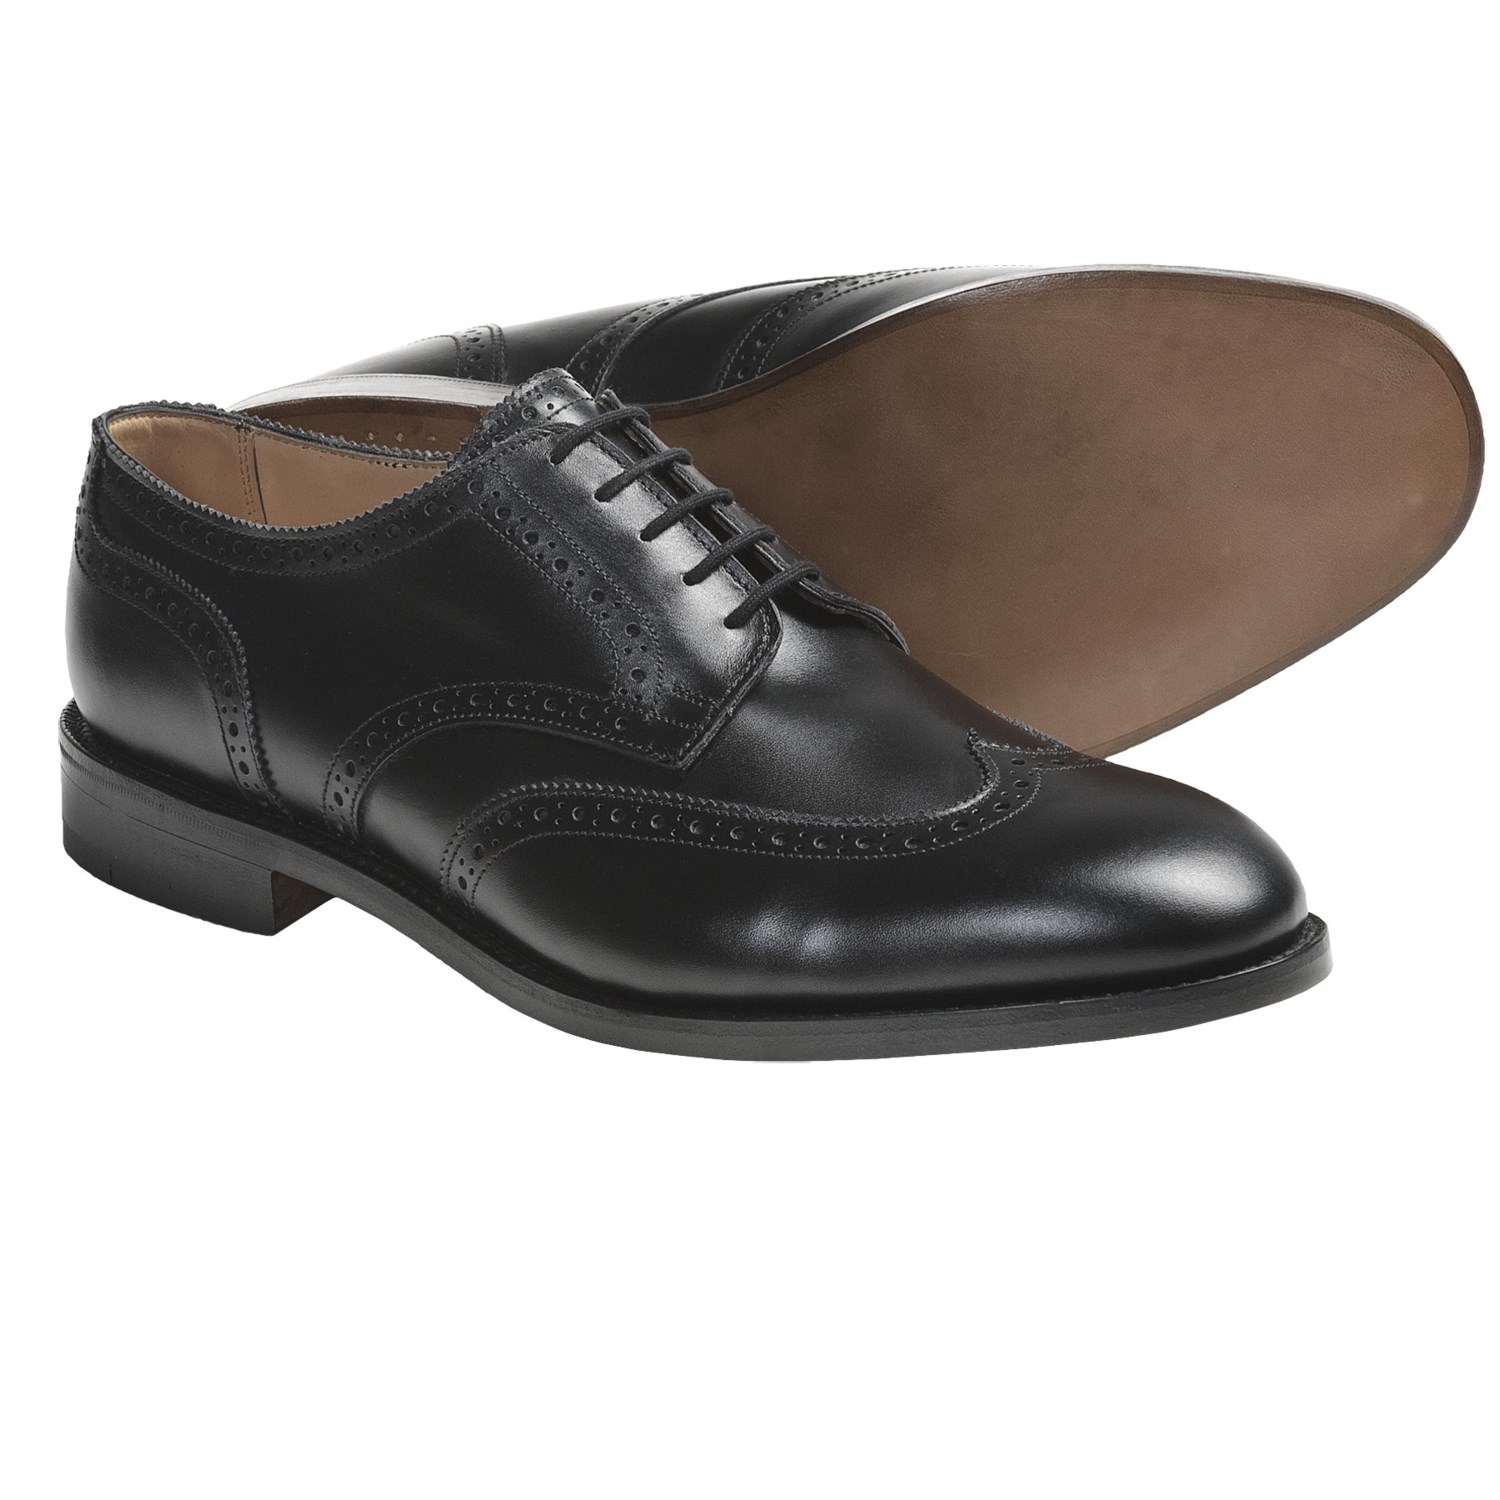 Tricker's Whitman Wingtip Shoes (For Men) 4763F - Save 58%